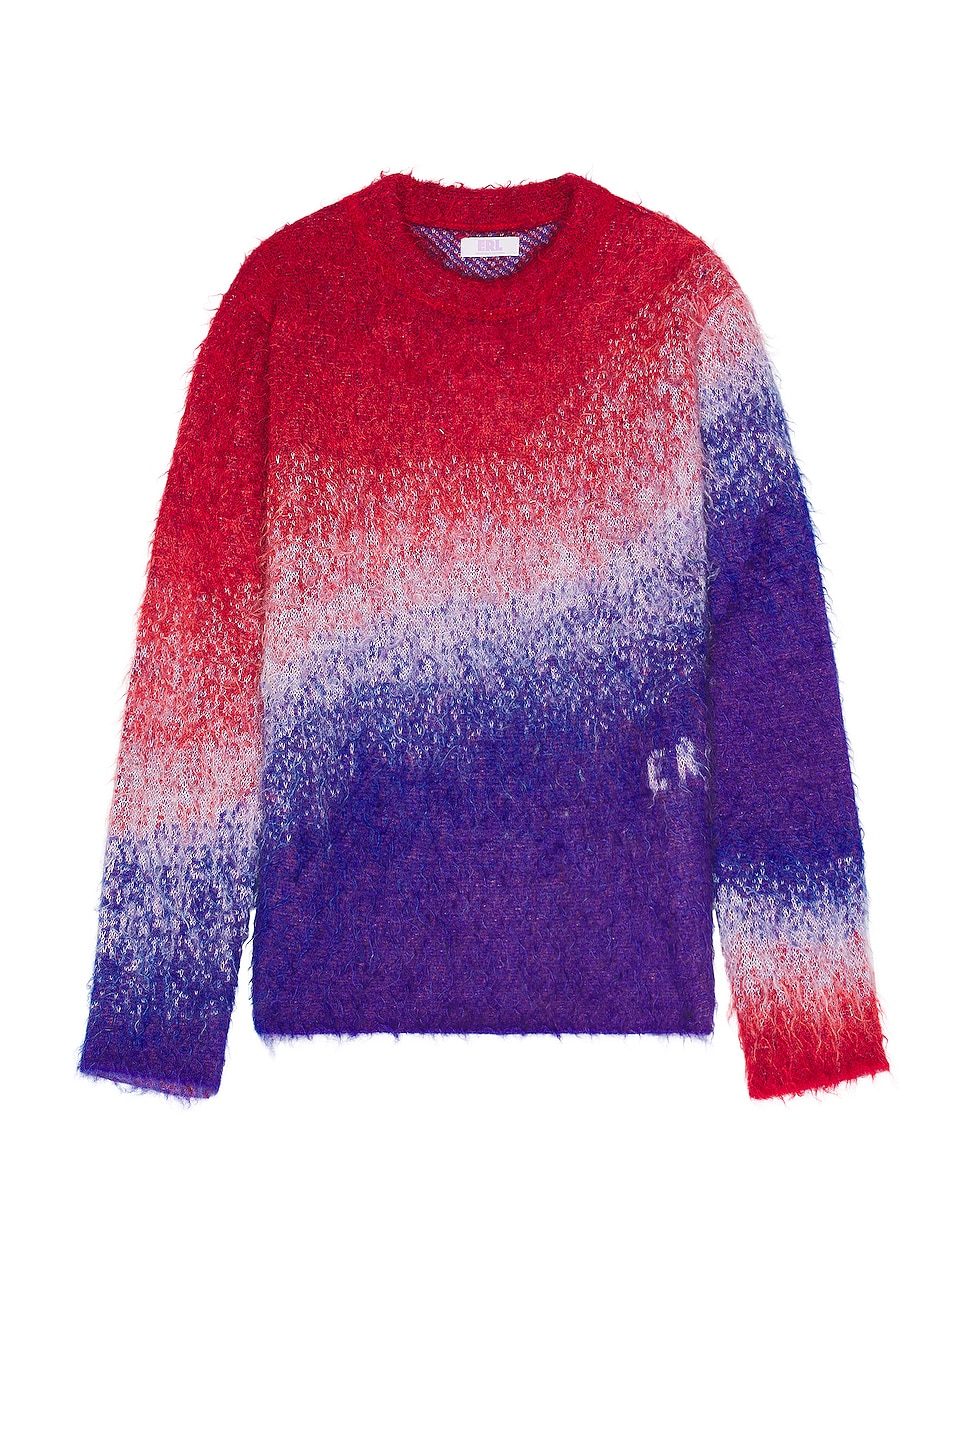 Image 1 of ERL Unisex Degrade Vneck Sweater Knit in BLUE RED WHITE